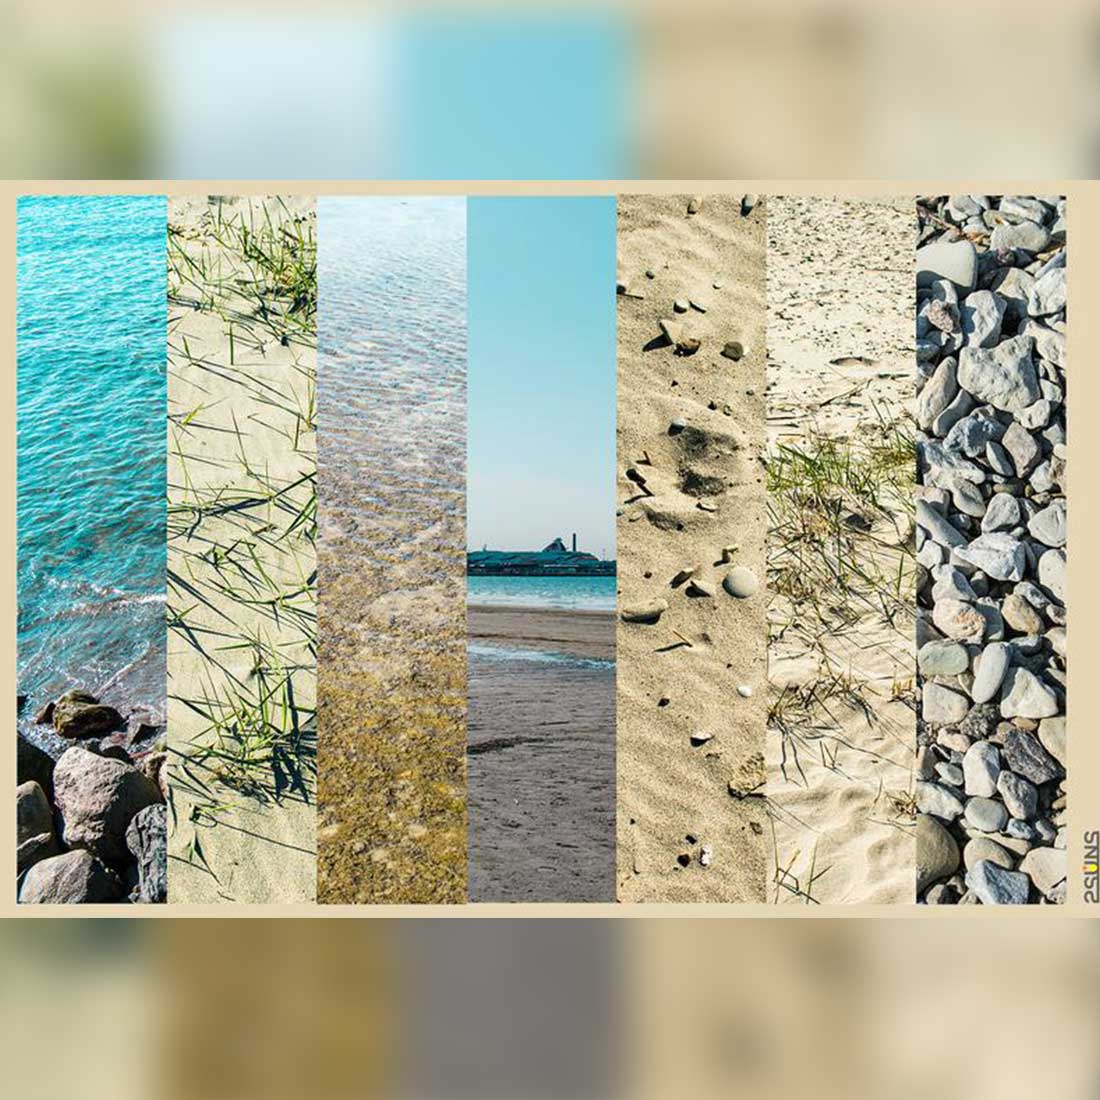 Natural Stone Sea And Beach Textures Preview Image.